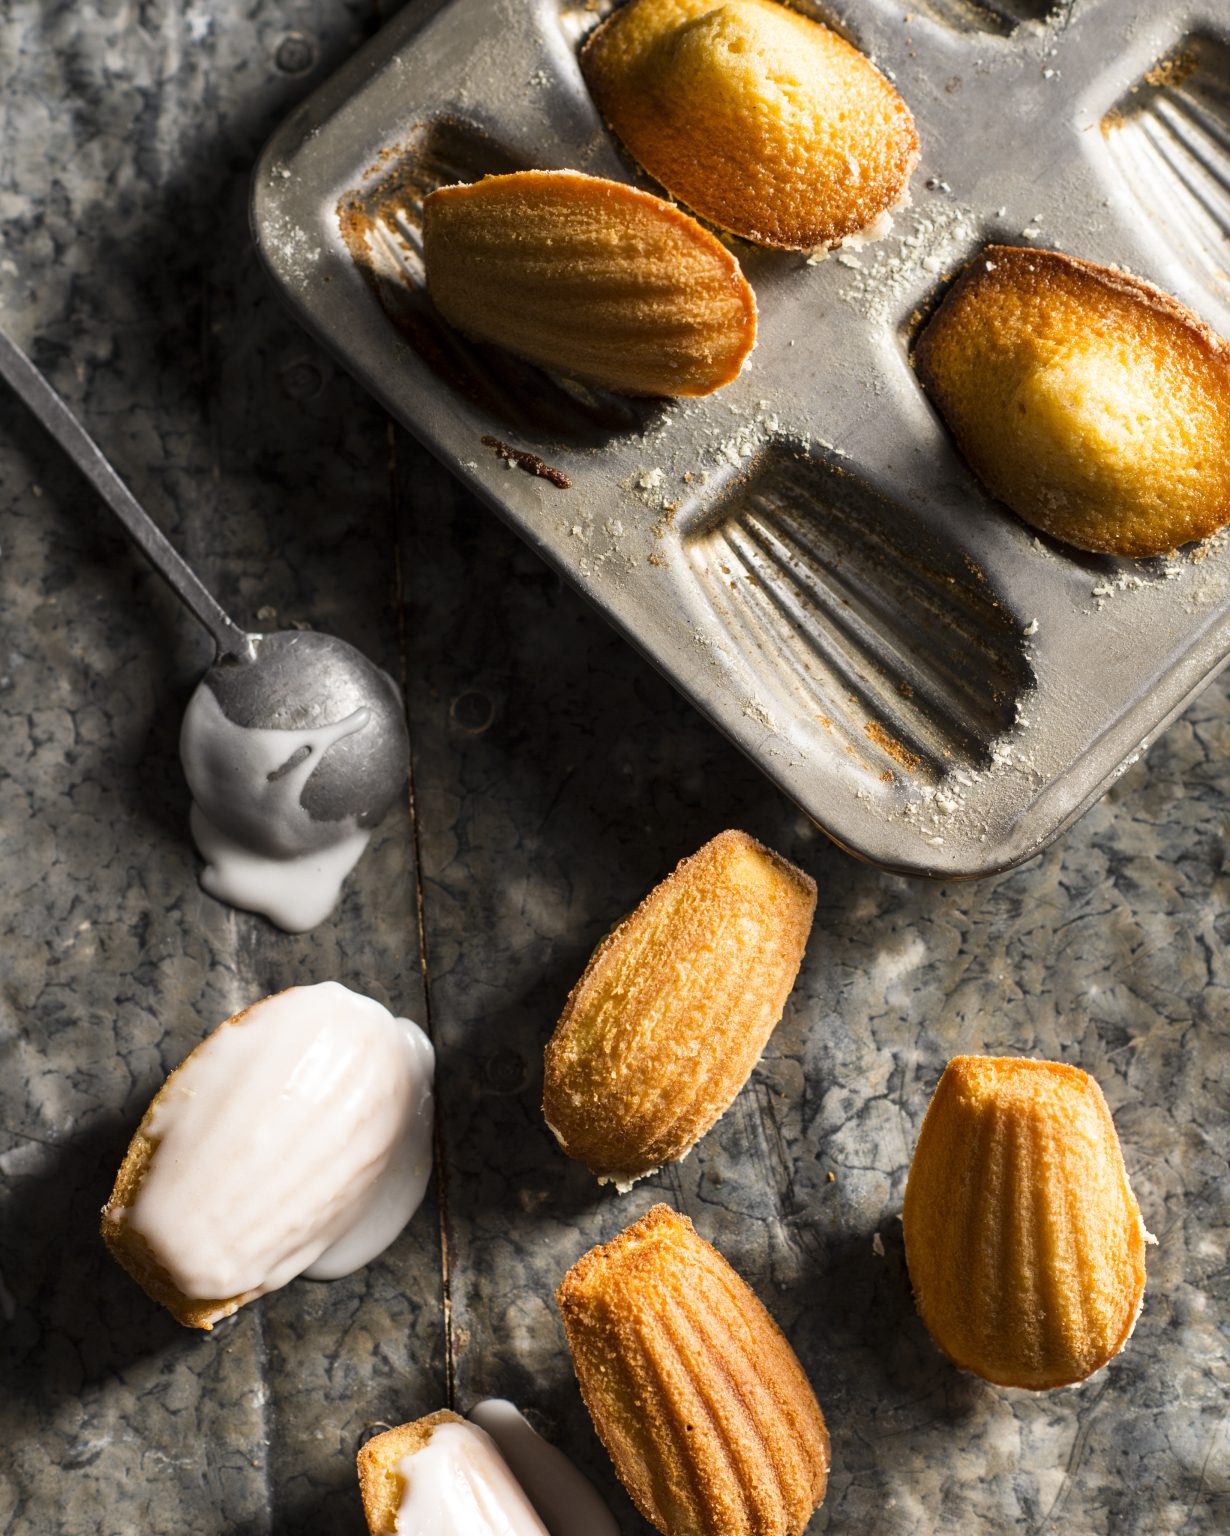 Box of 6 madeleines: delicate shell-shaped cakes, perfect for a sweet treat